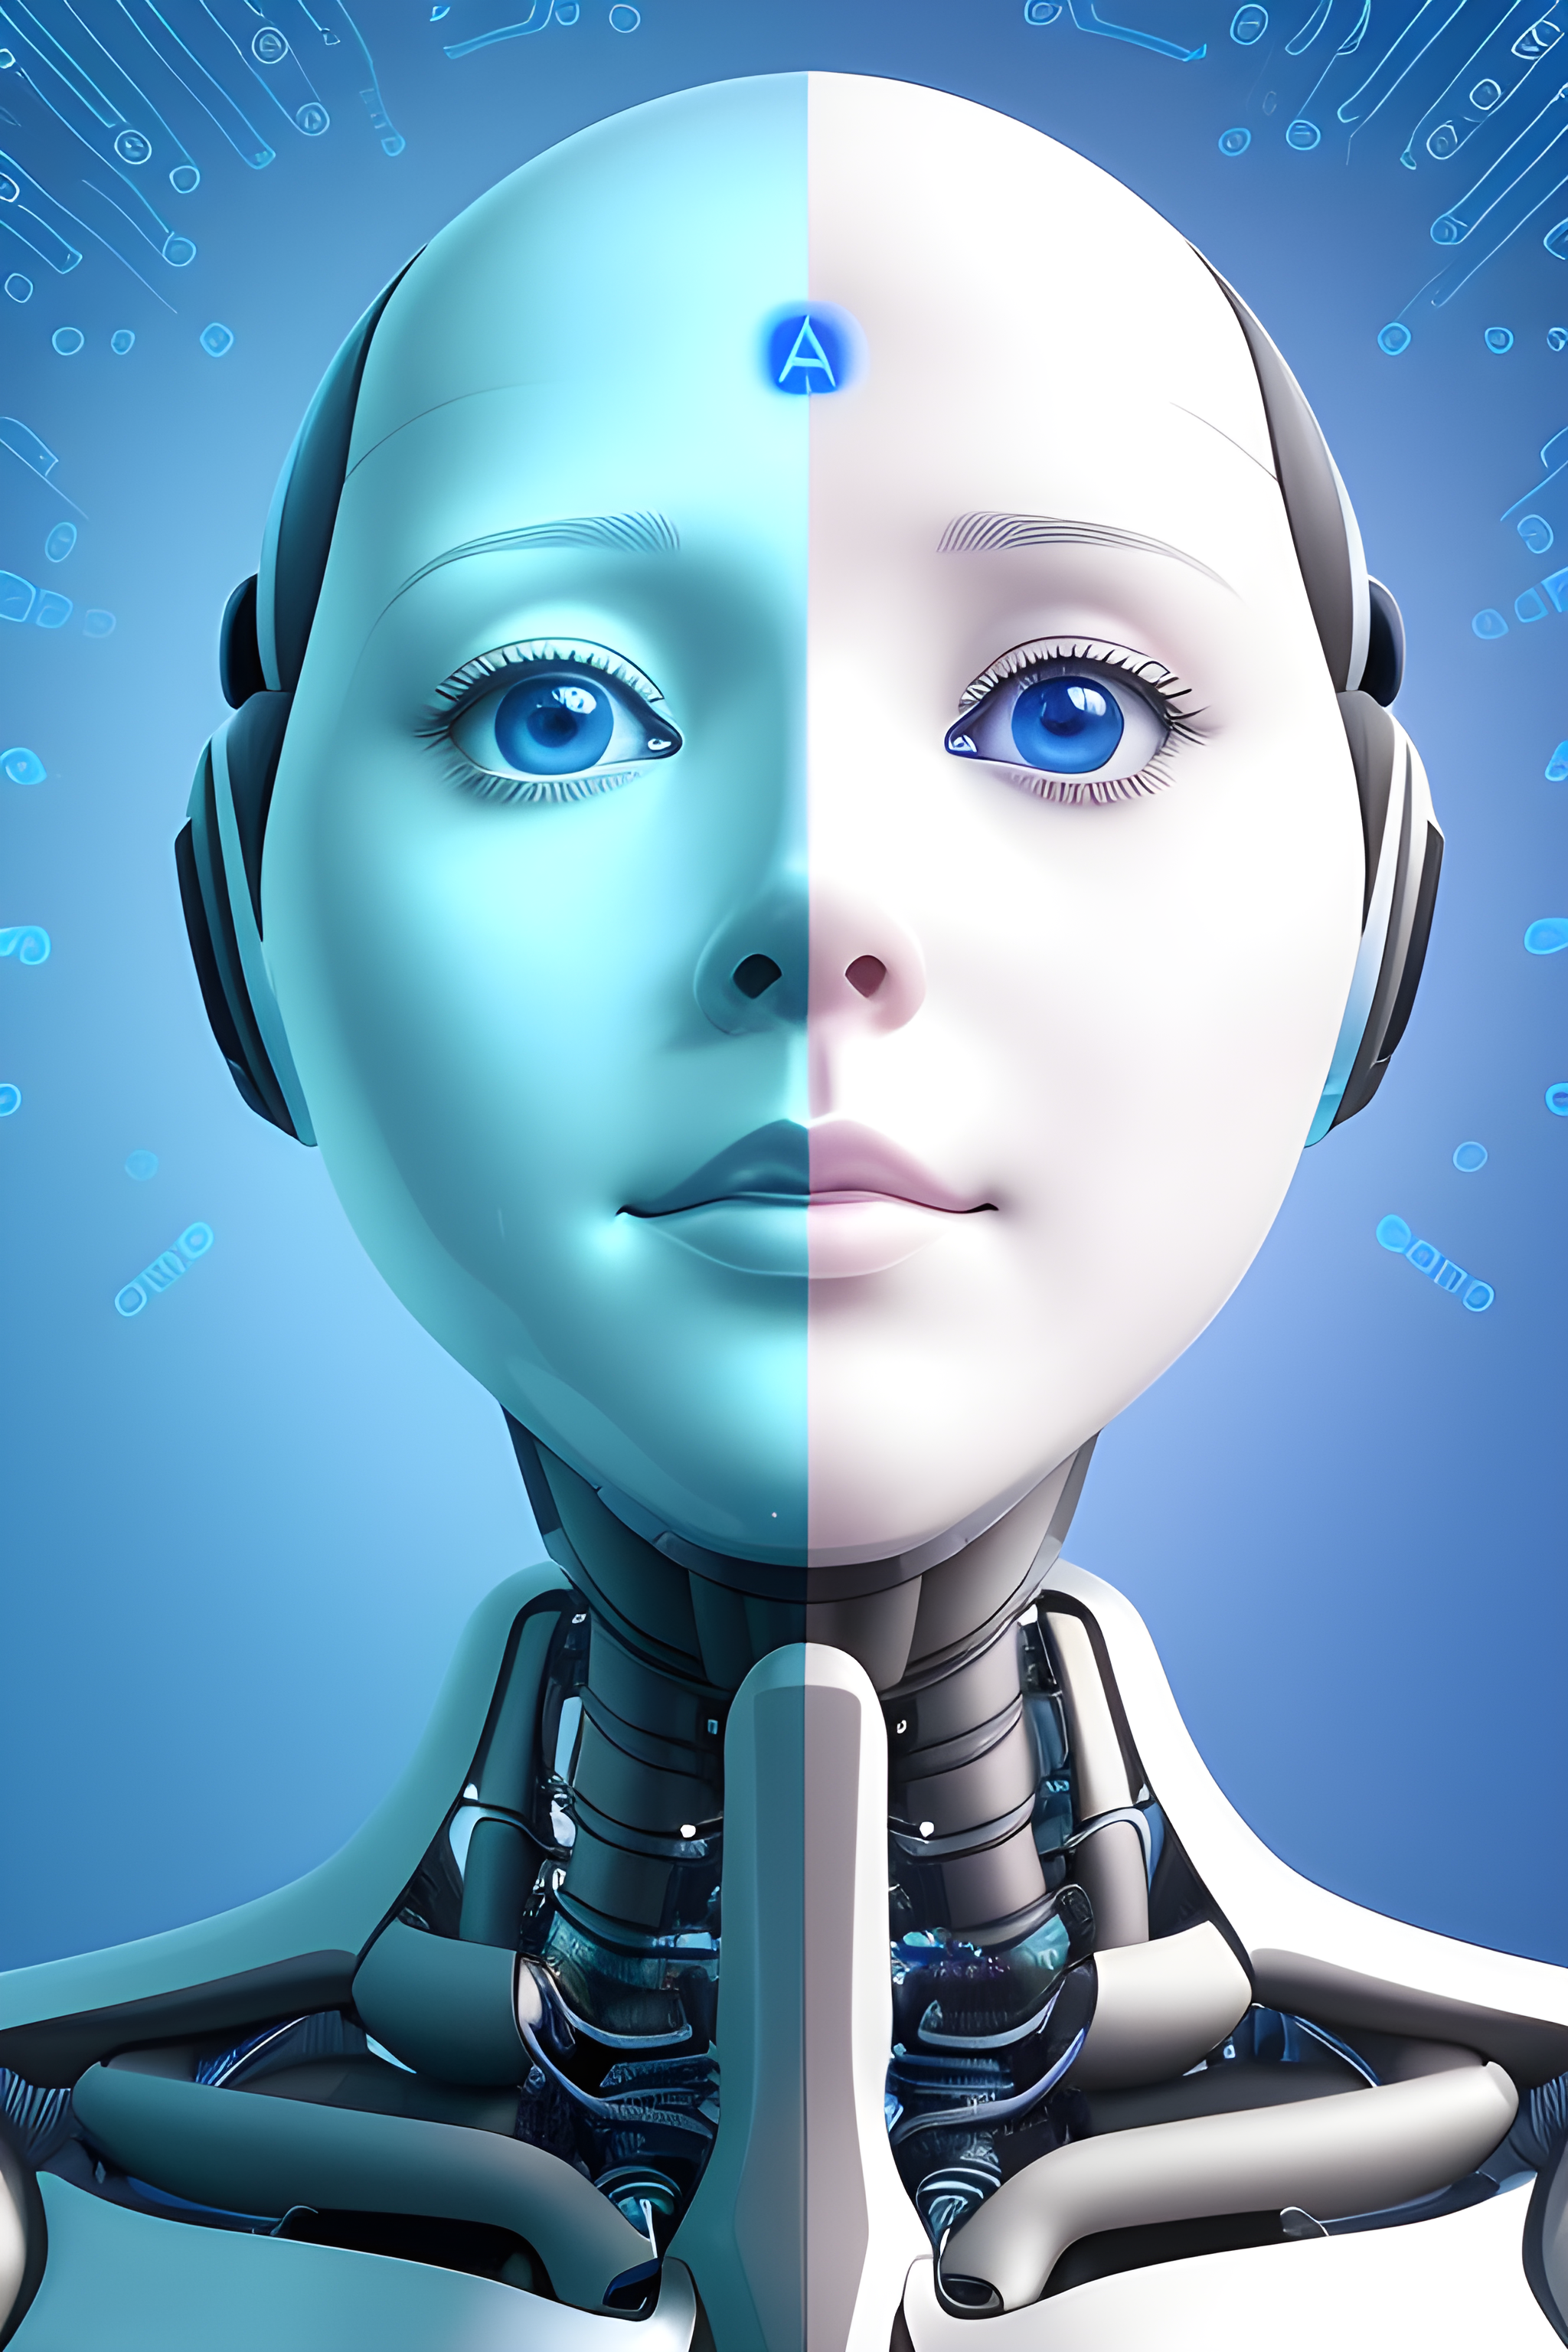 Image of an Artificial Intelligence Humanoid